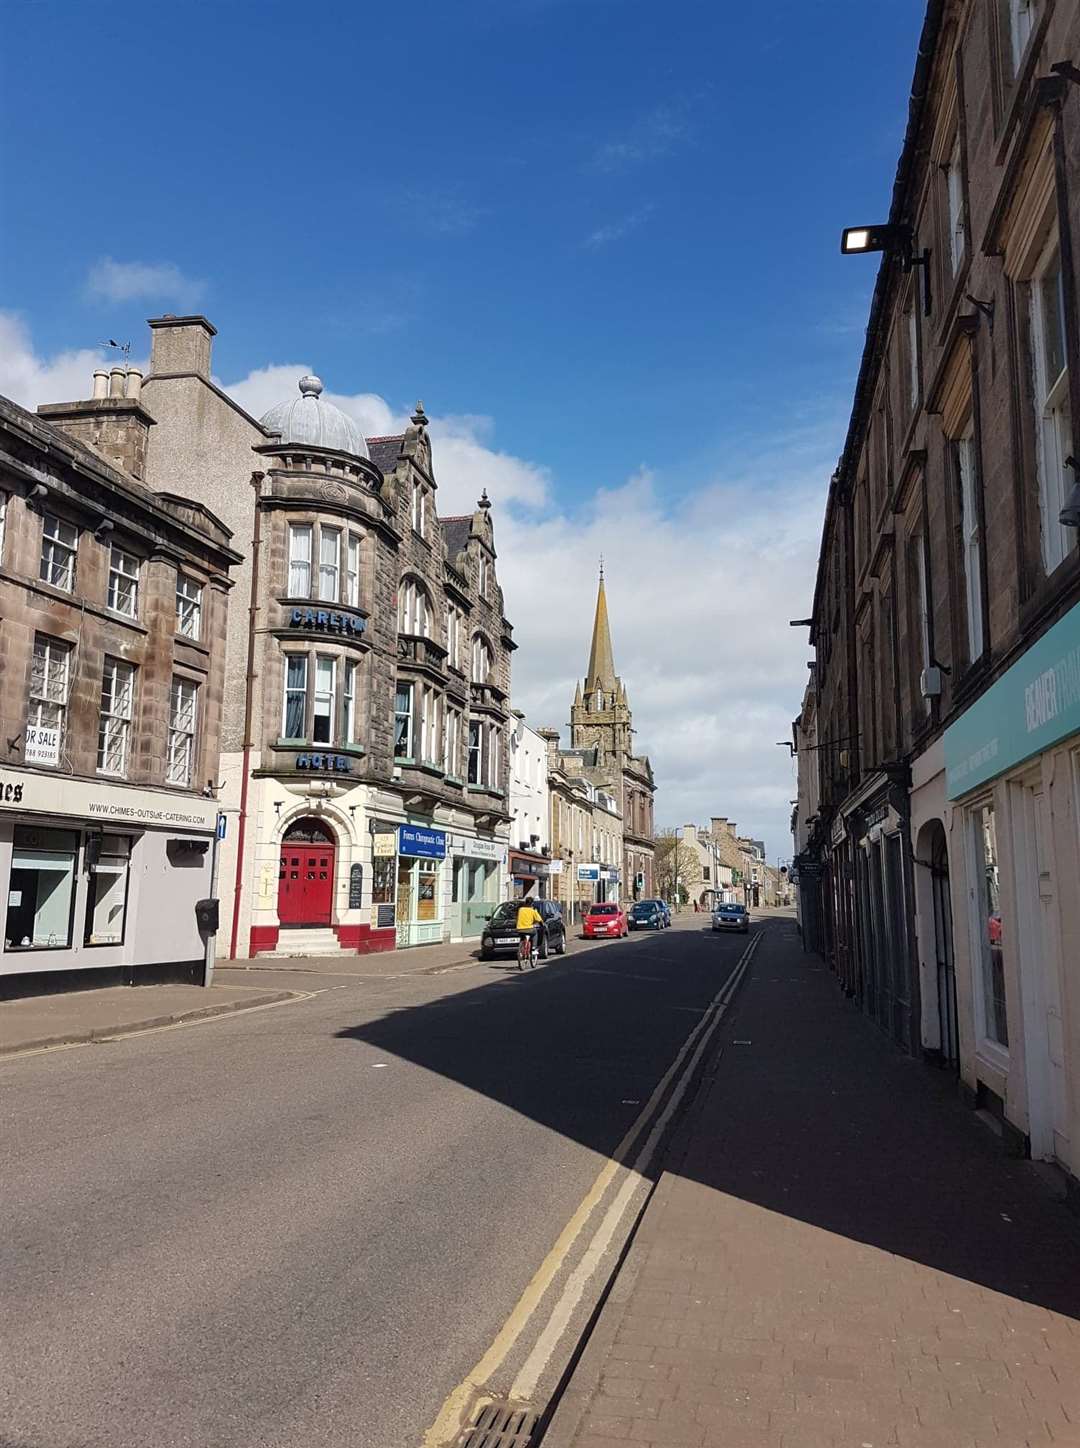 Forres High Street.